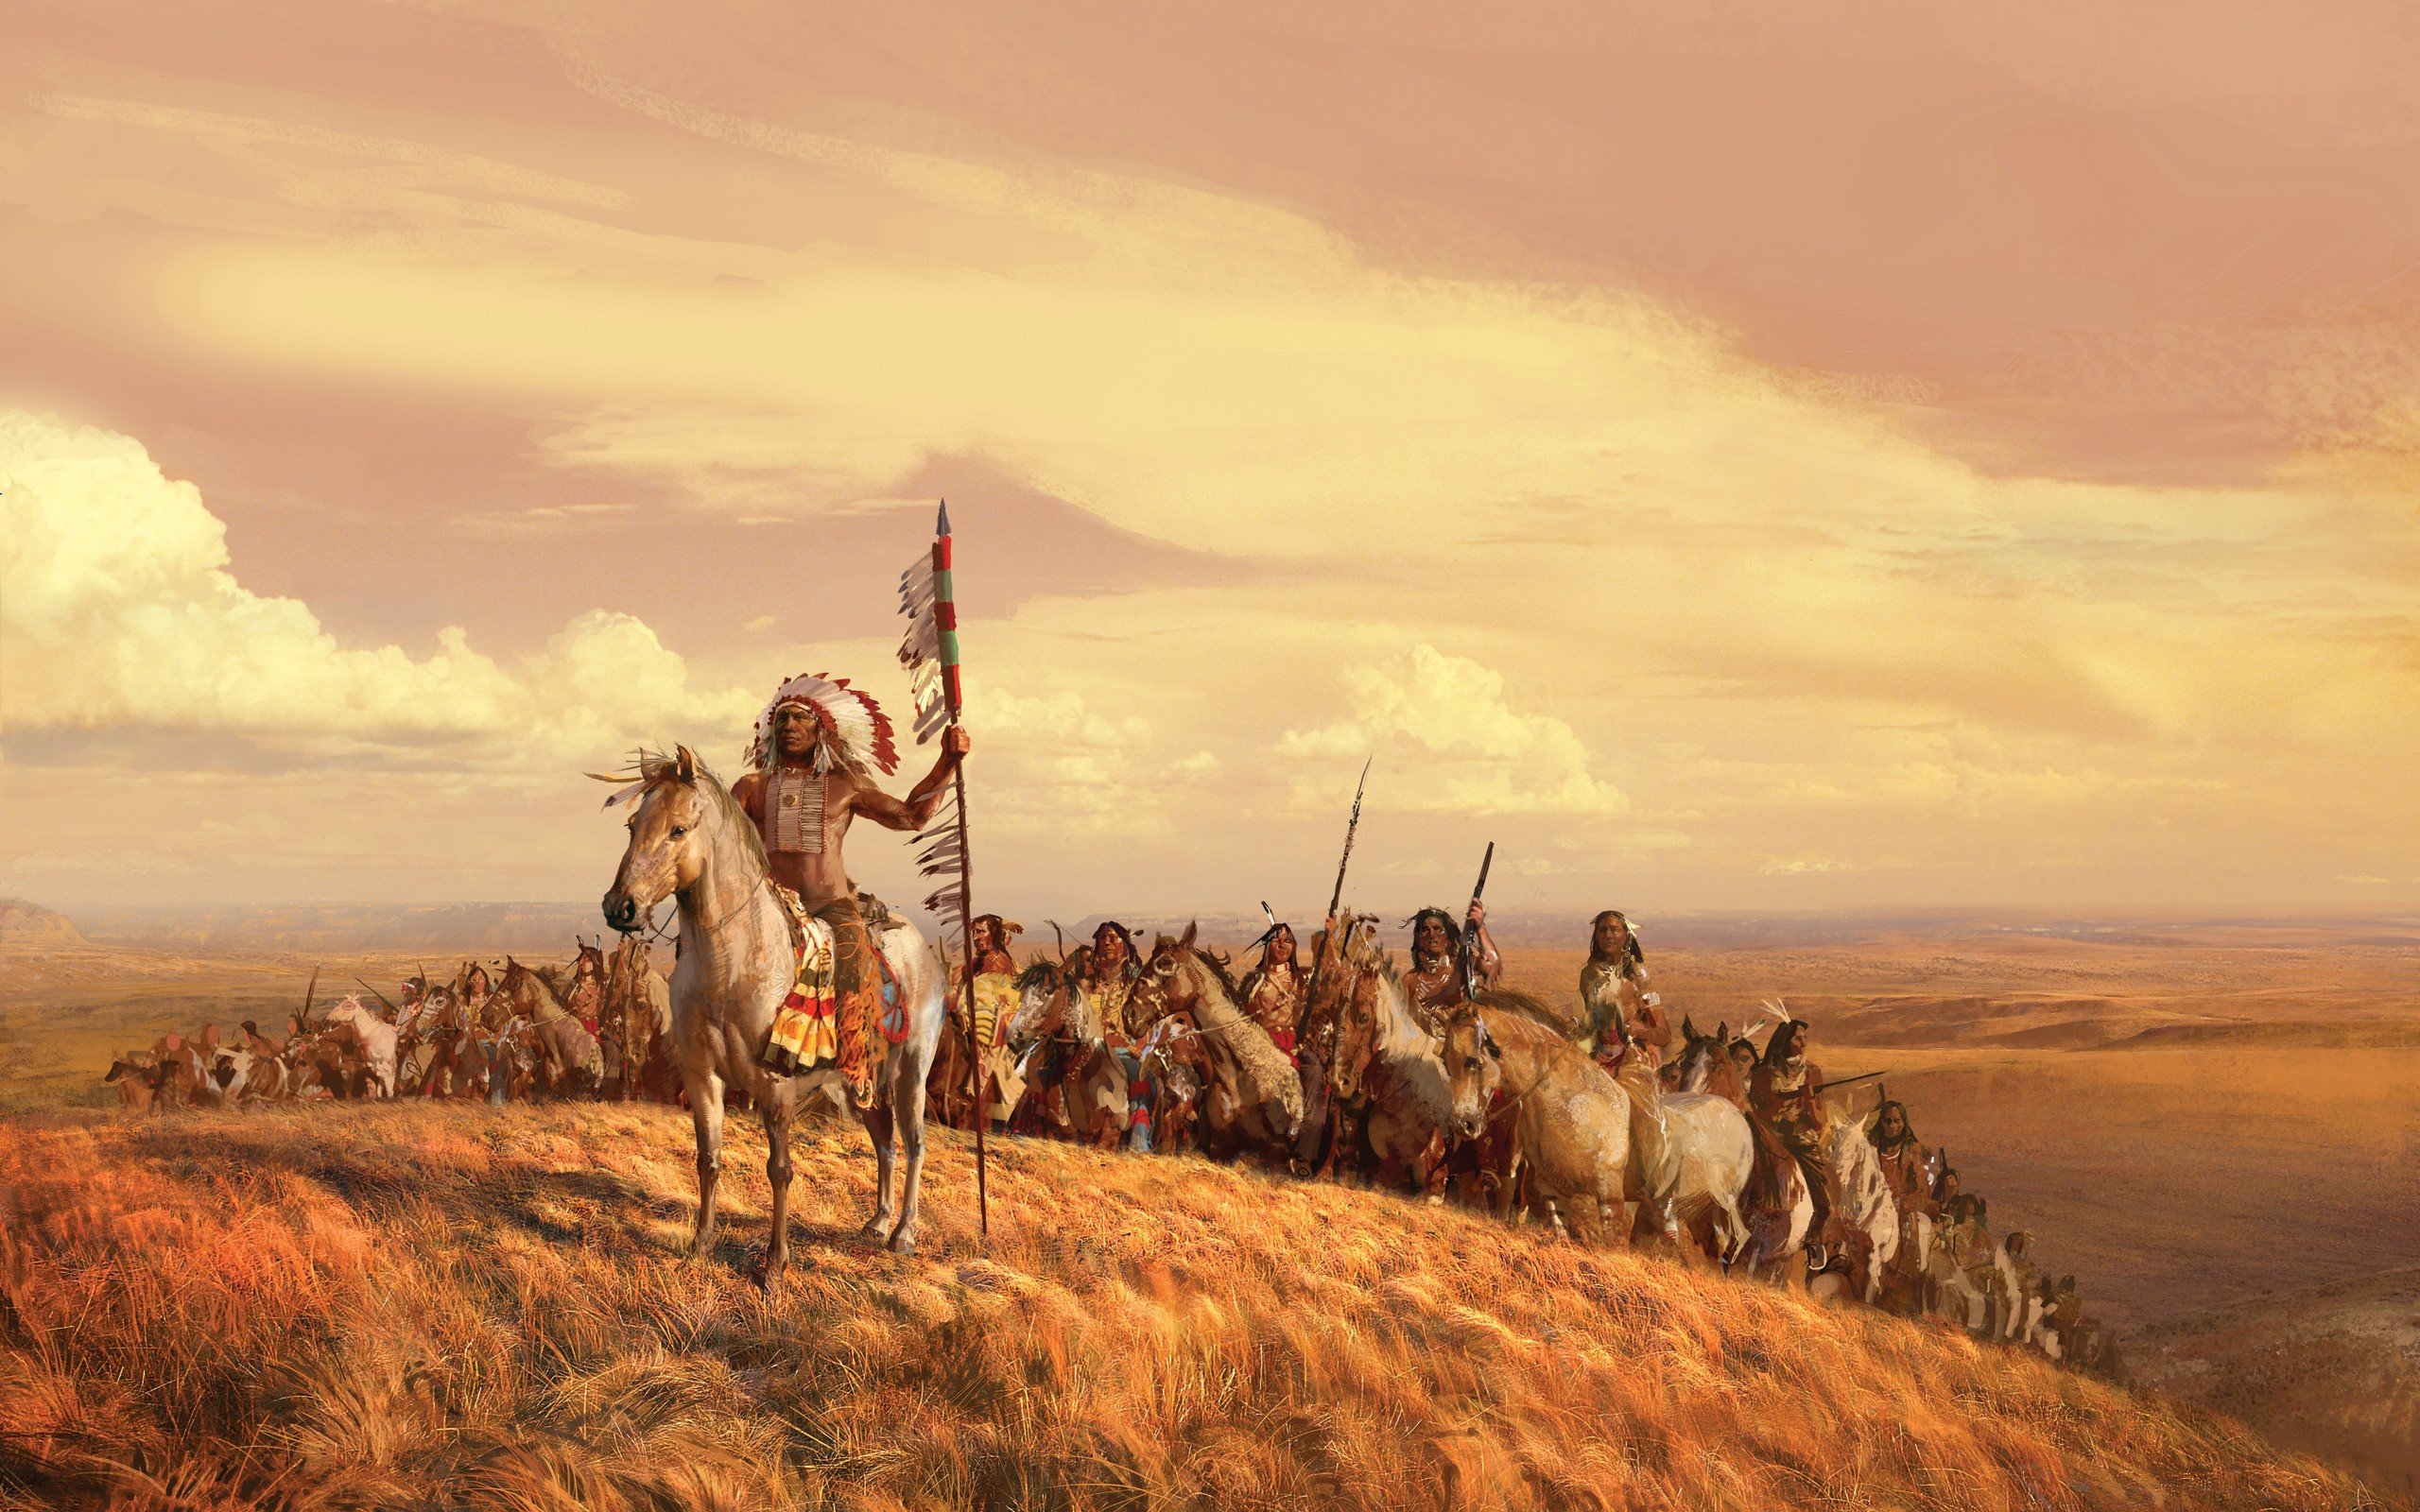 paintings, Landscapes, Valleys, Horses, Indians, Artwork, Spears, Skyscapes, Leader, Tribes Wallpaper